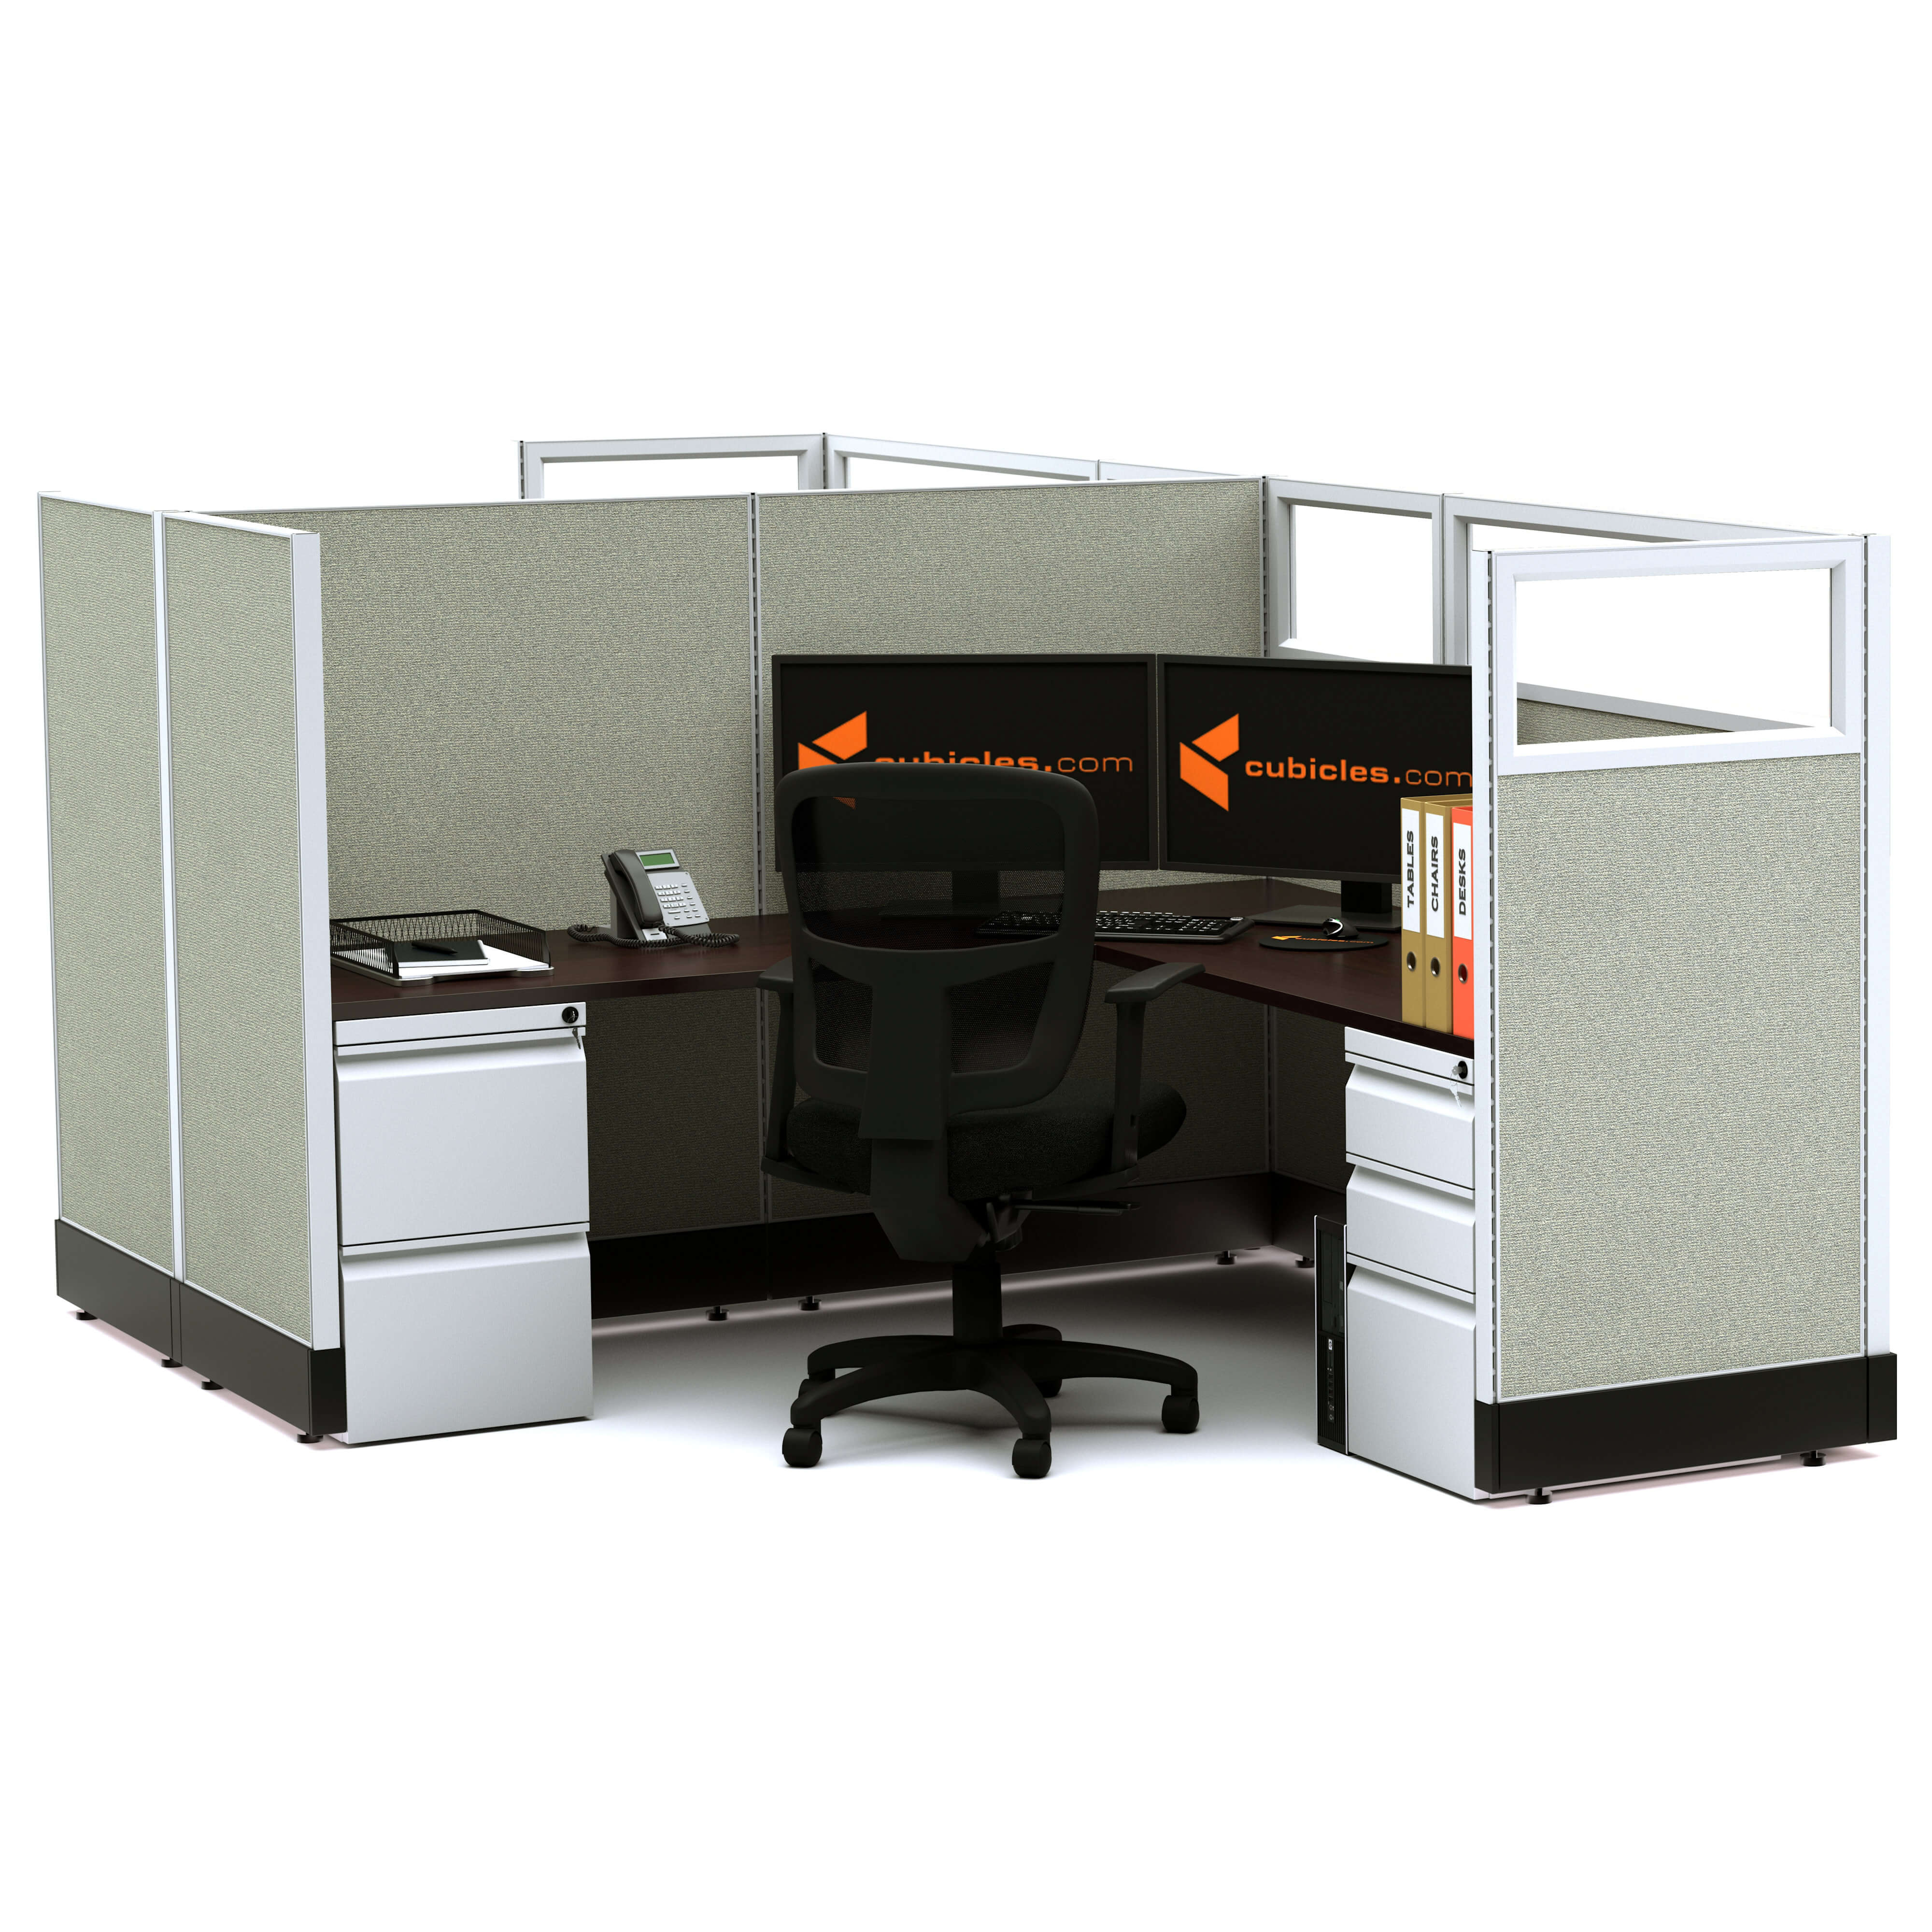 Modular office furniture partial glass office cubicles 53h 2pack cluster non powered